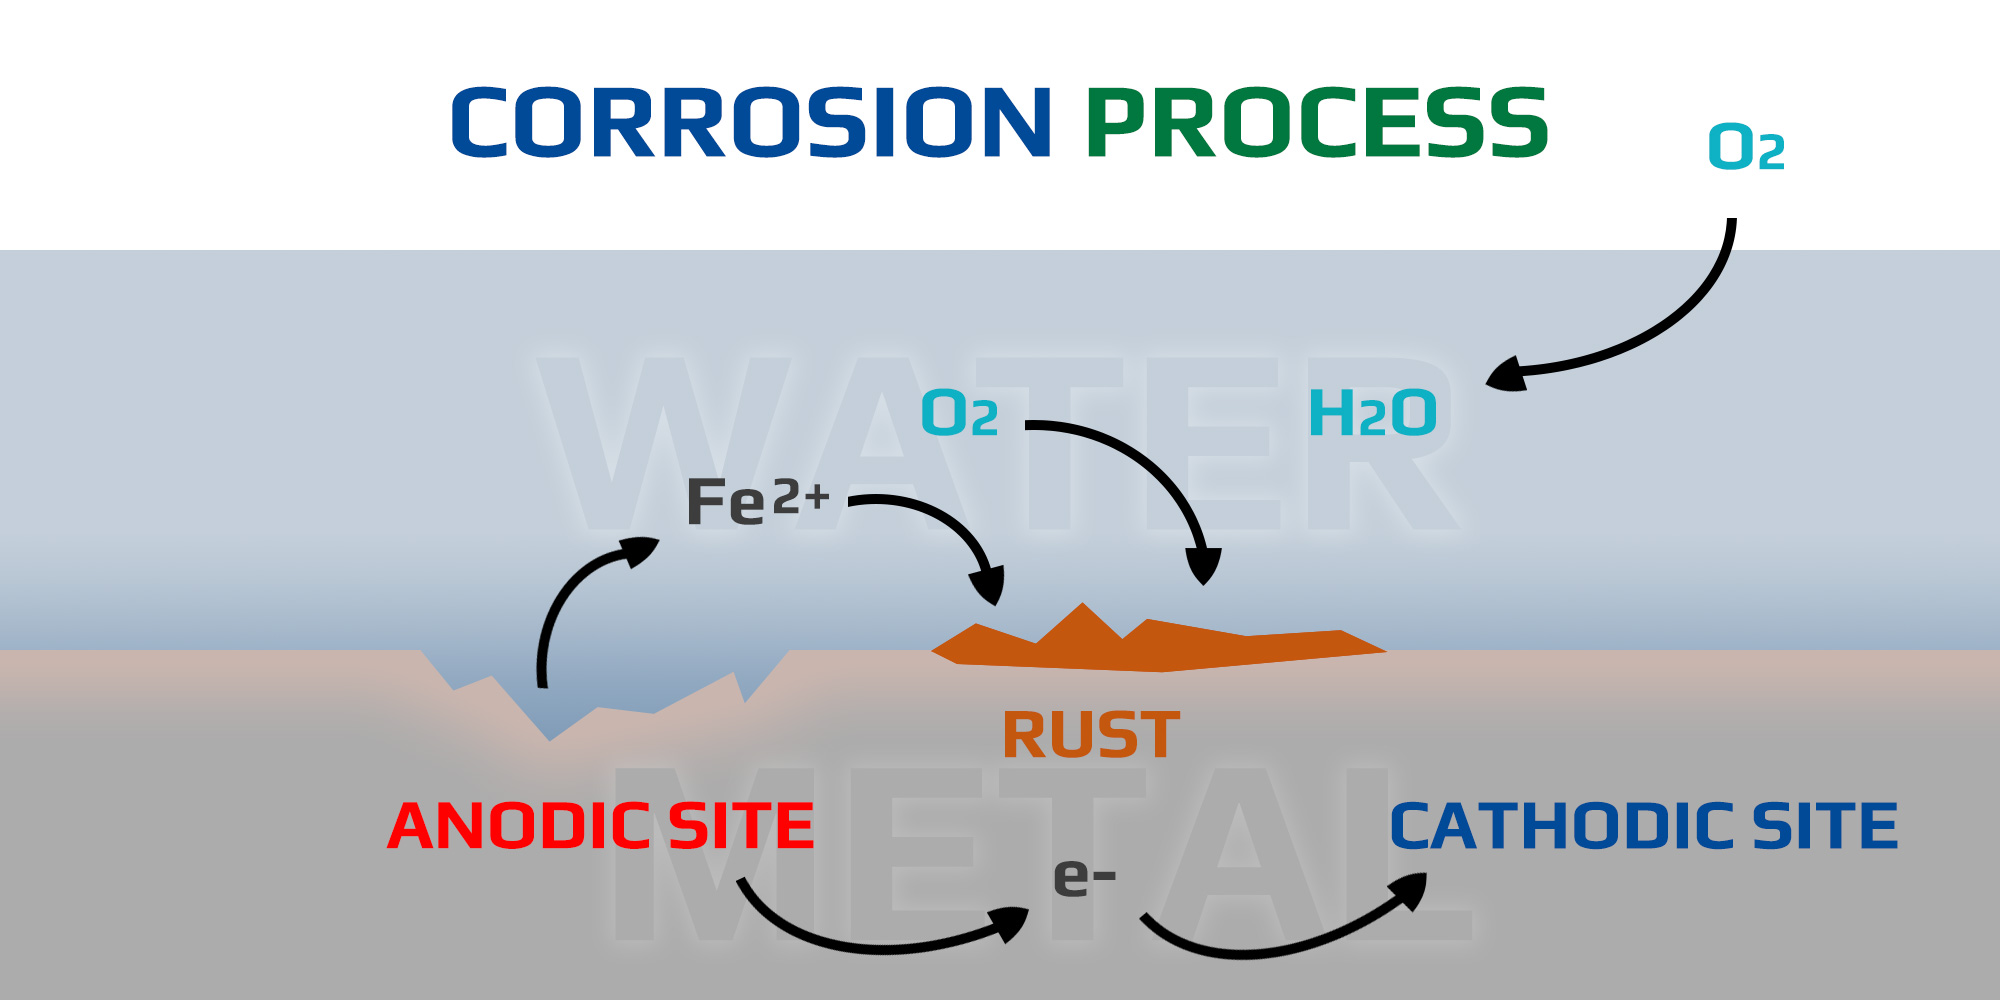 Diagram illustrating the corrosion process in metals, featuring labels for anodic and cathodic sites, and showing how oxygen, water, and ions interact to form rust.